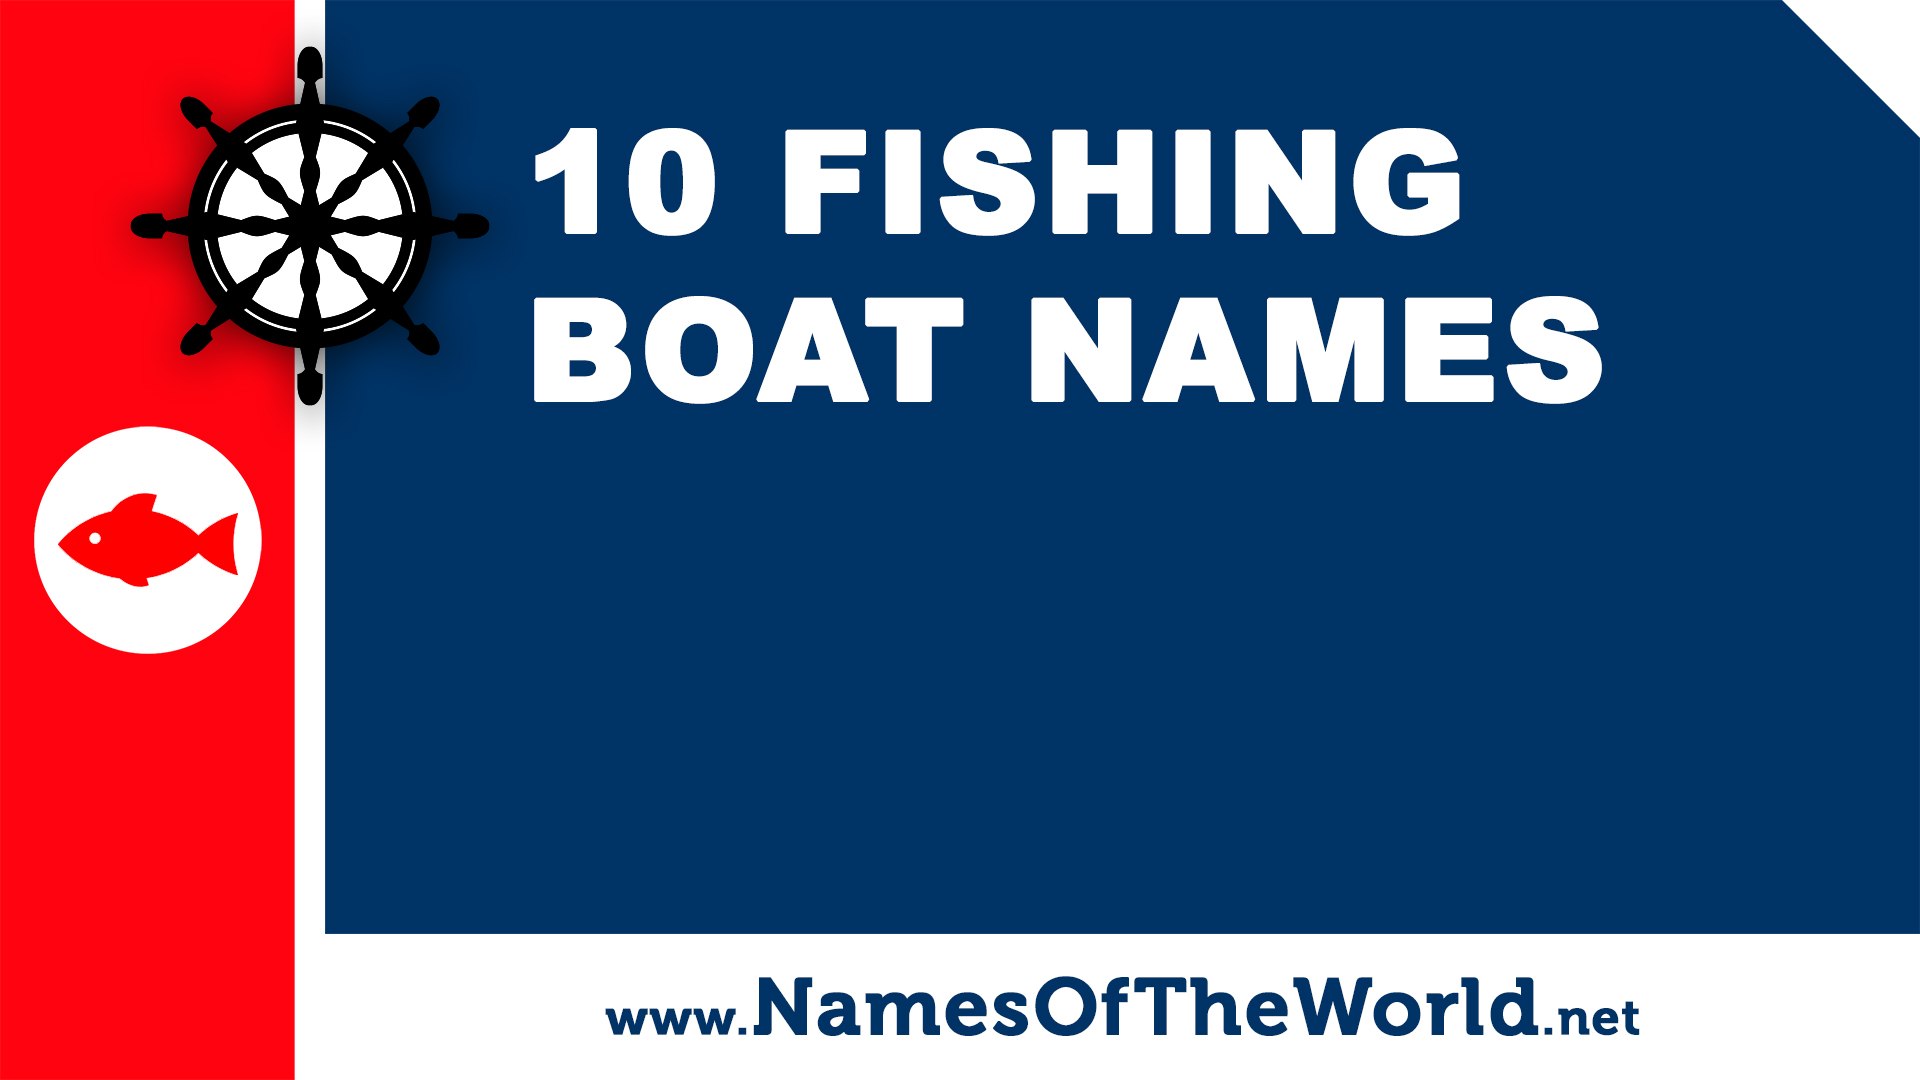 10 fishing boat names - the best names for your boat -  www.namesoftheworld.net - video Dailymotion